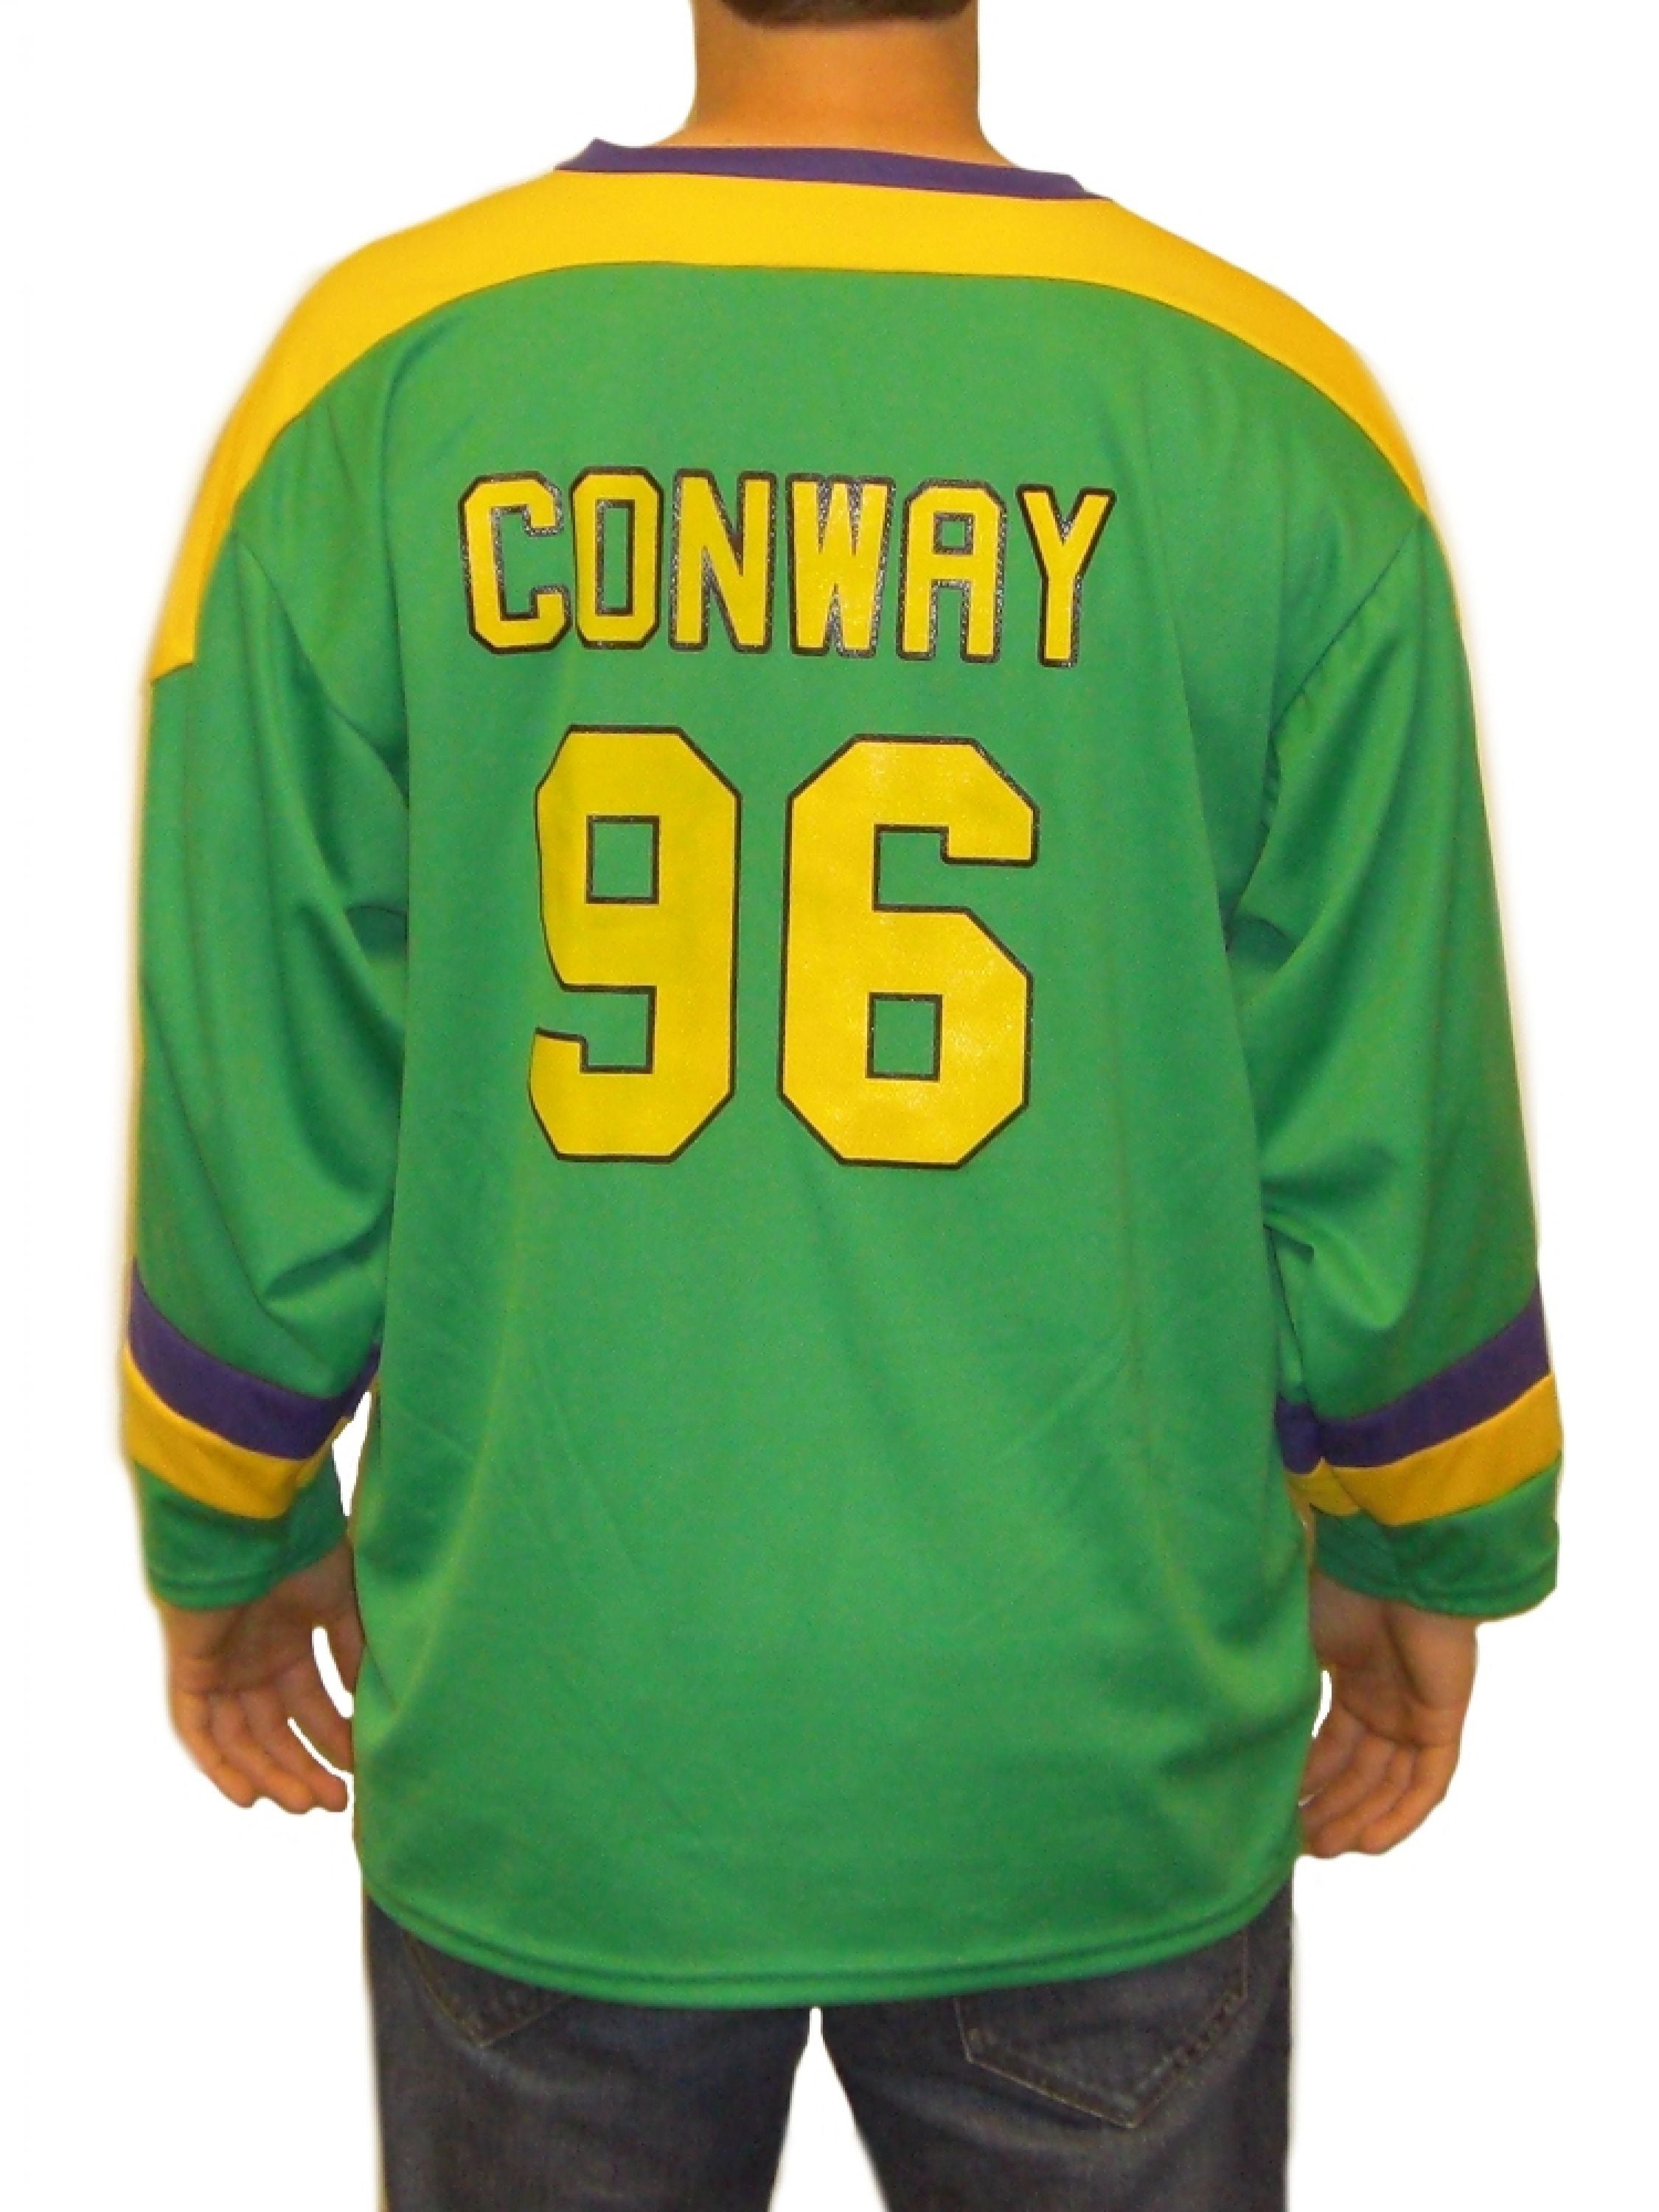 charlie conway ducks jersey